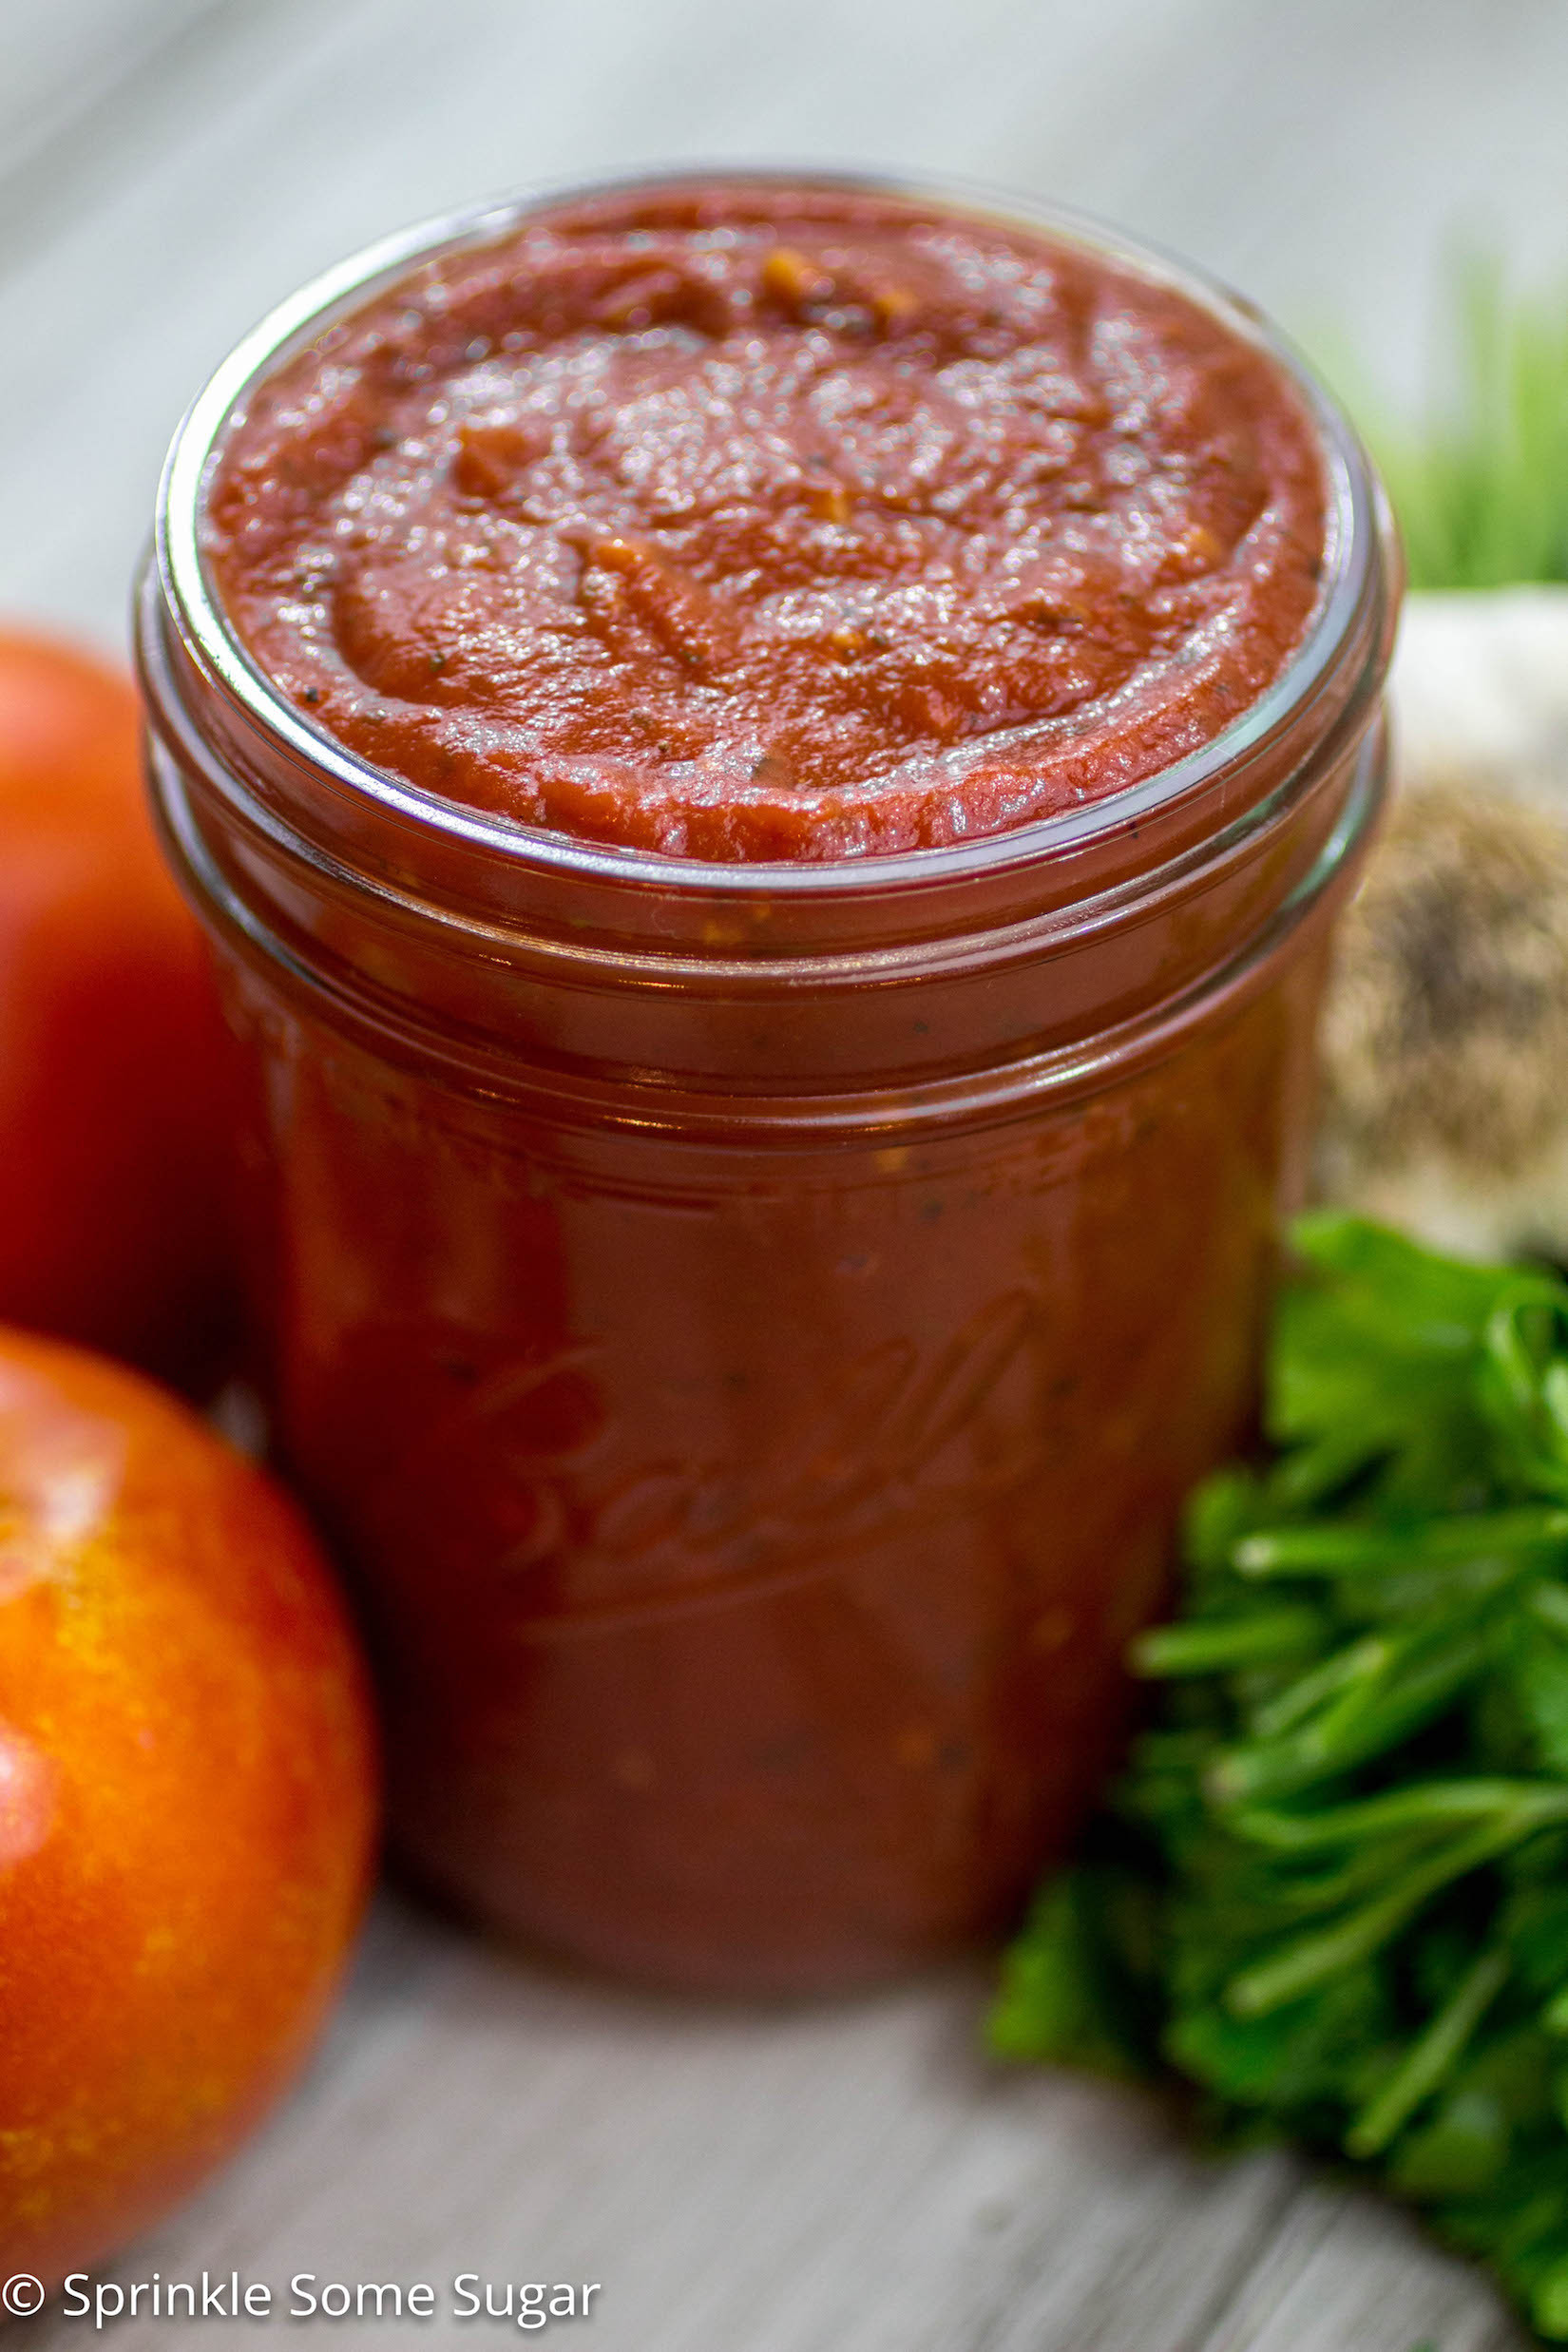 Healthy Pizza Sauce Recipe
 The BEST Homemade Pizza Sauce Sprinkle Some Sugar